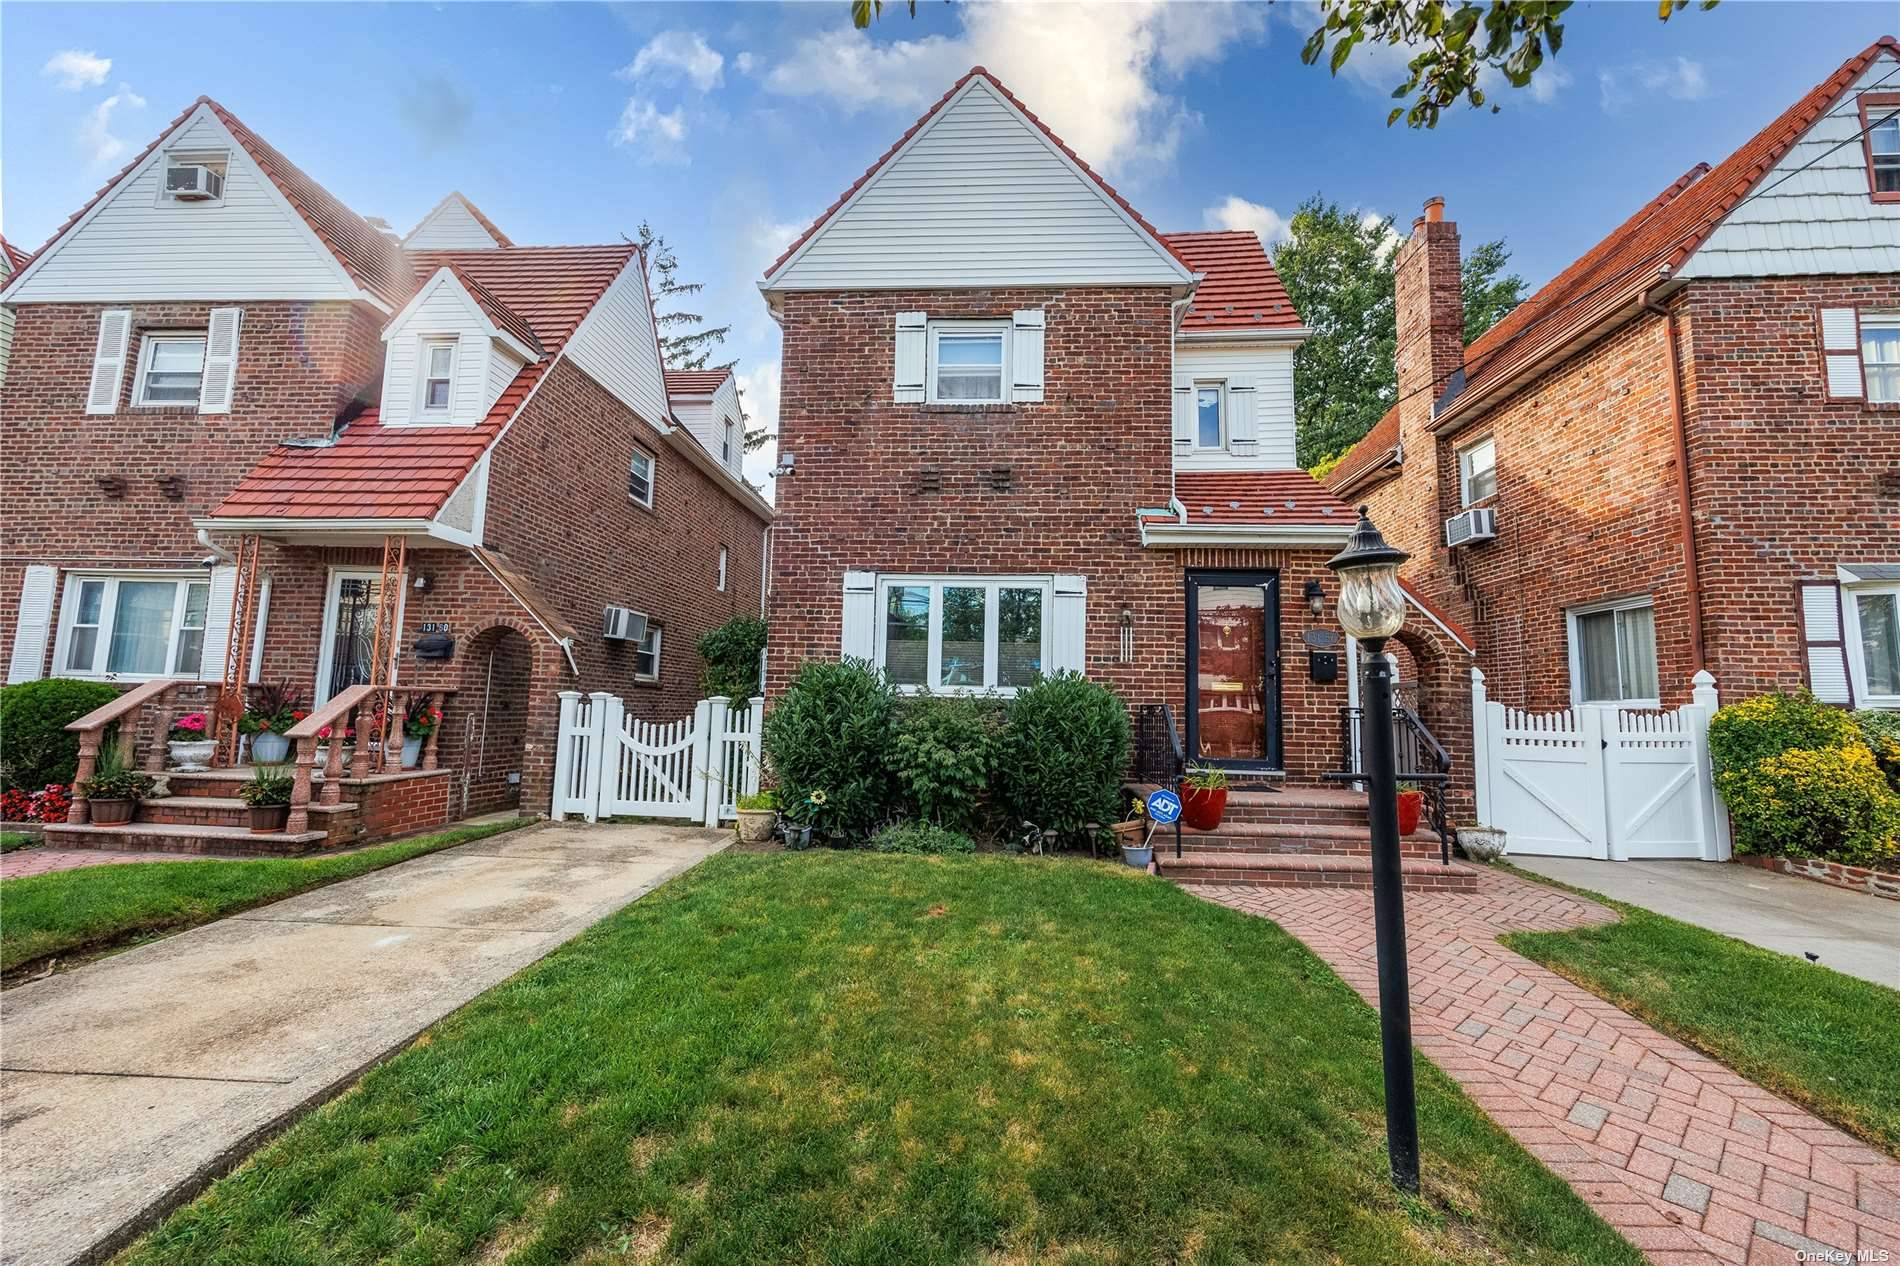 Welcome to this Classic Tudor home in Laurelton Queens.